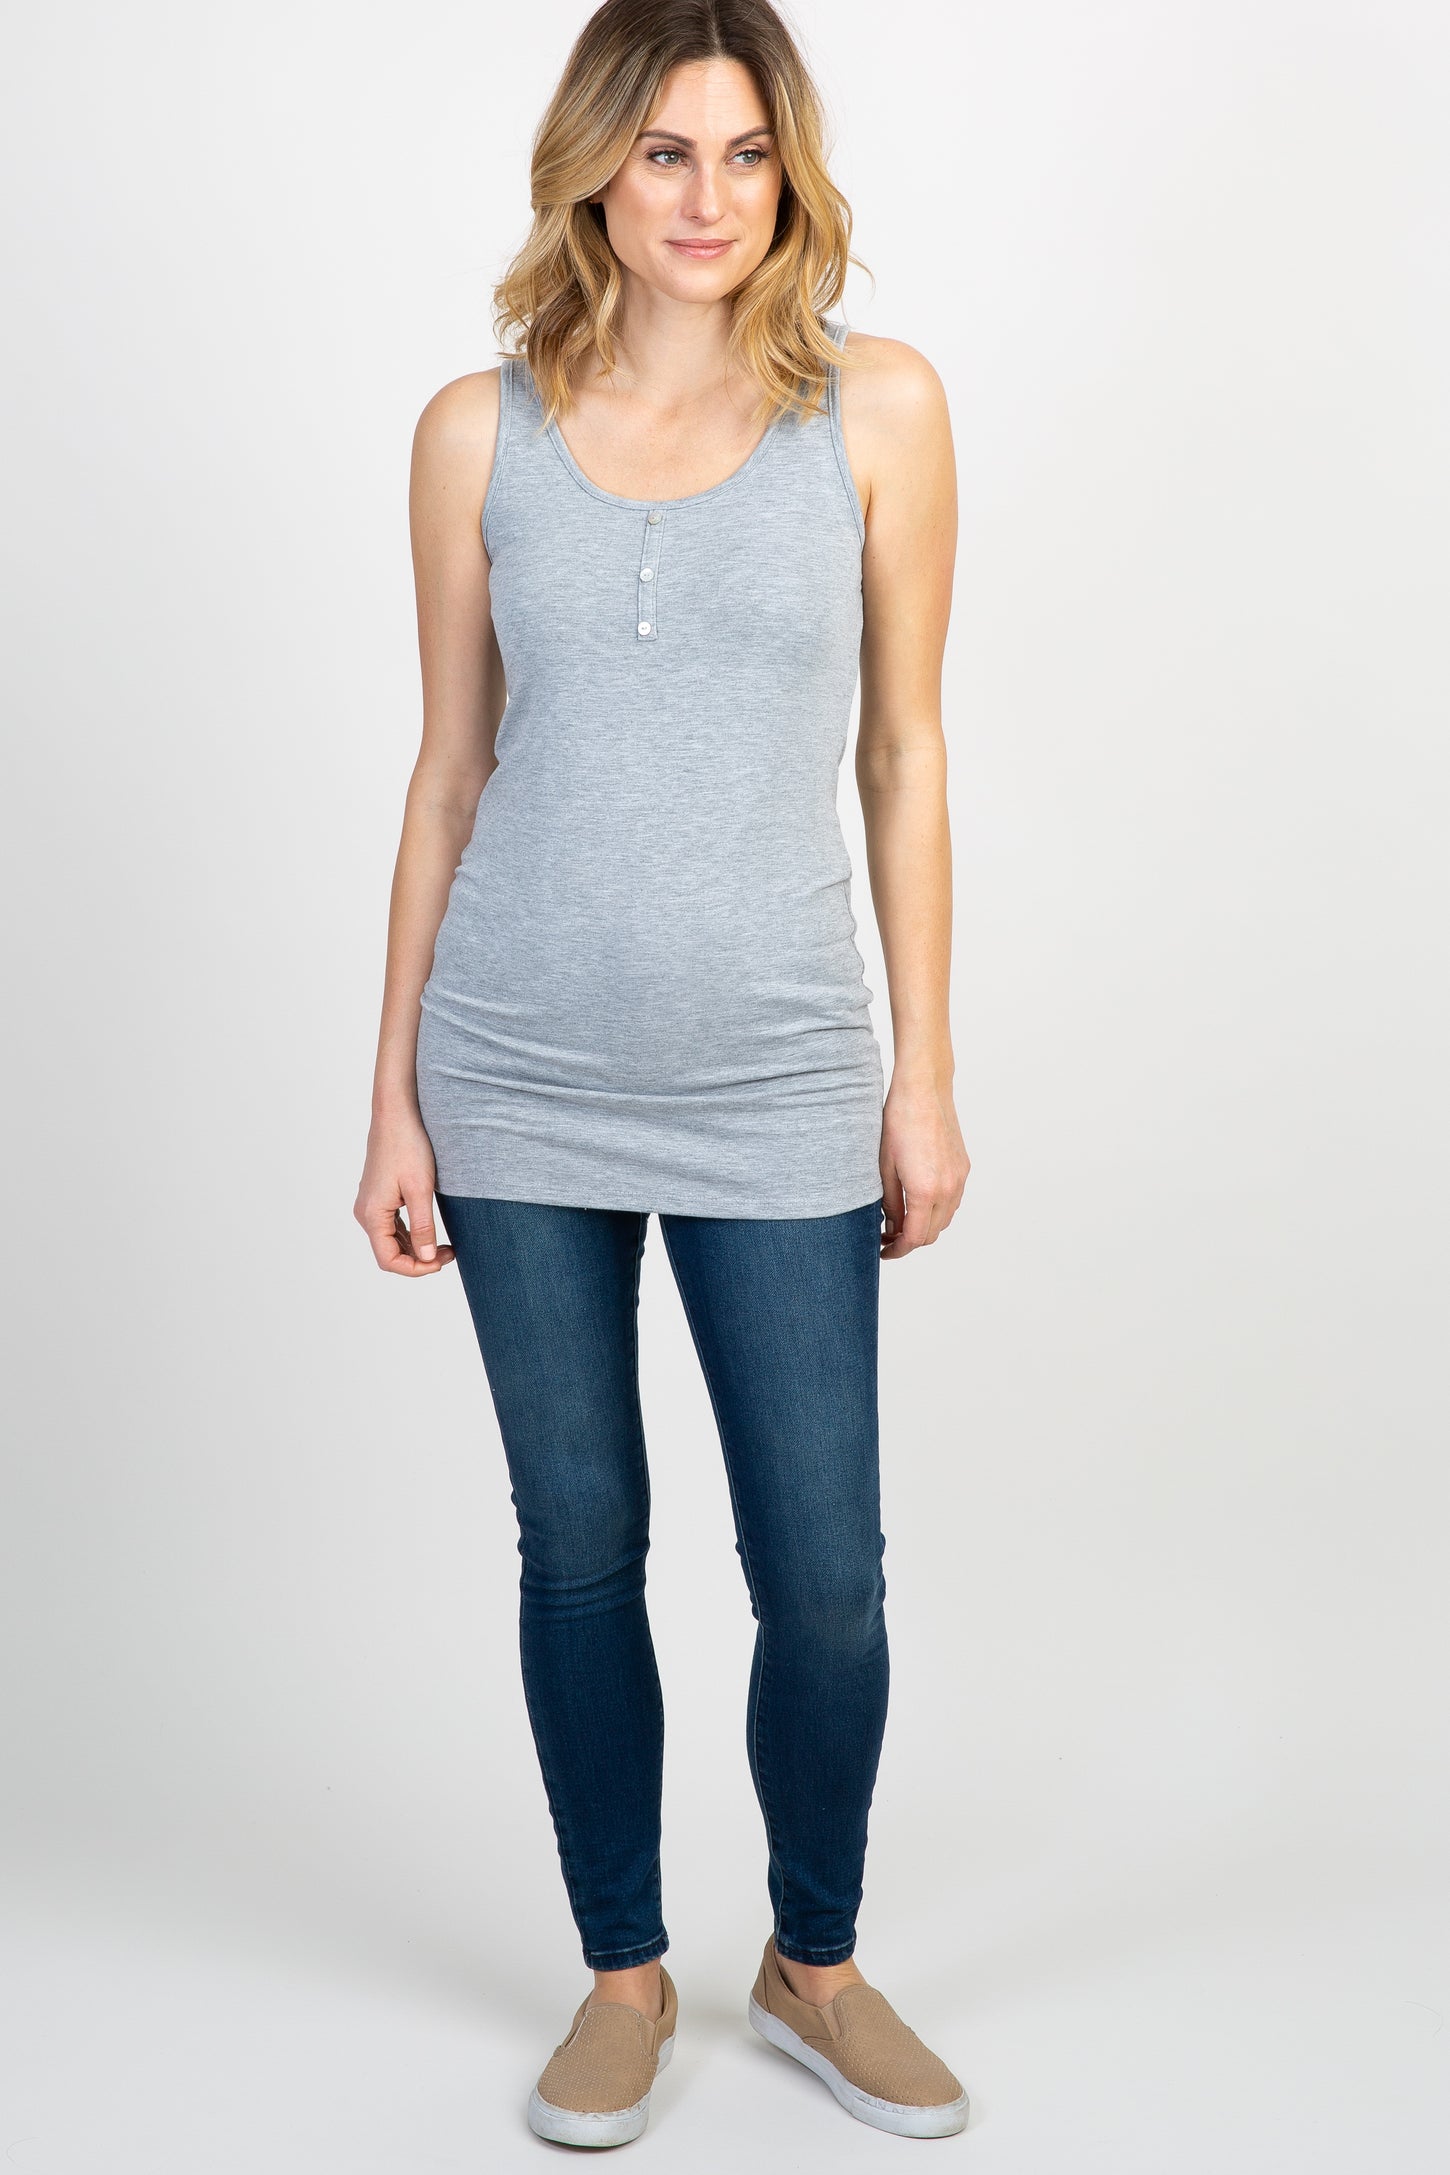 PinkBlush Heather Grey Button Accent Tank Top